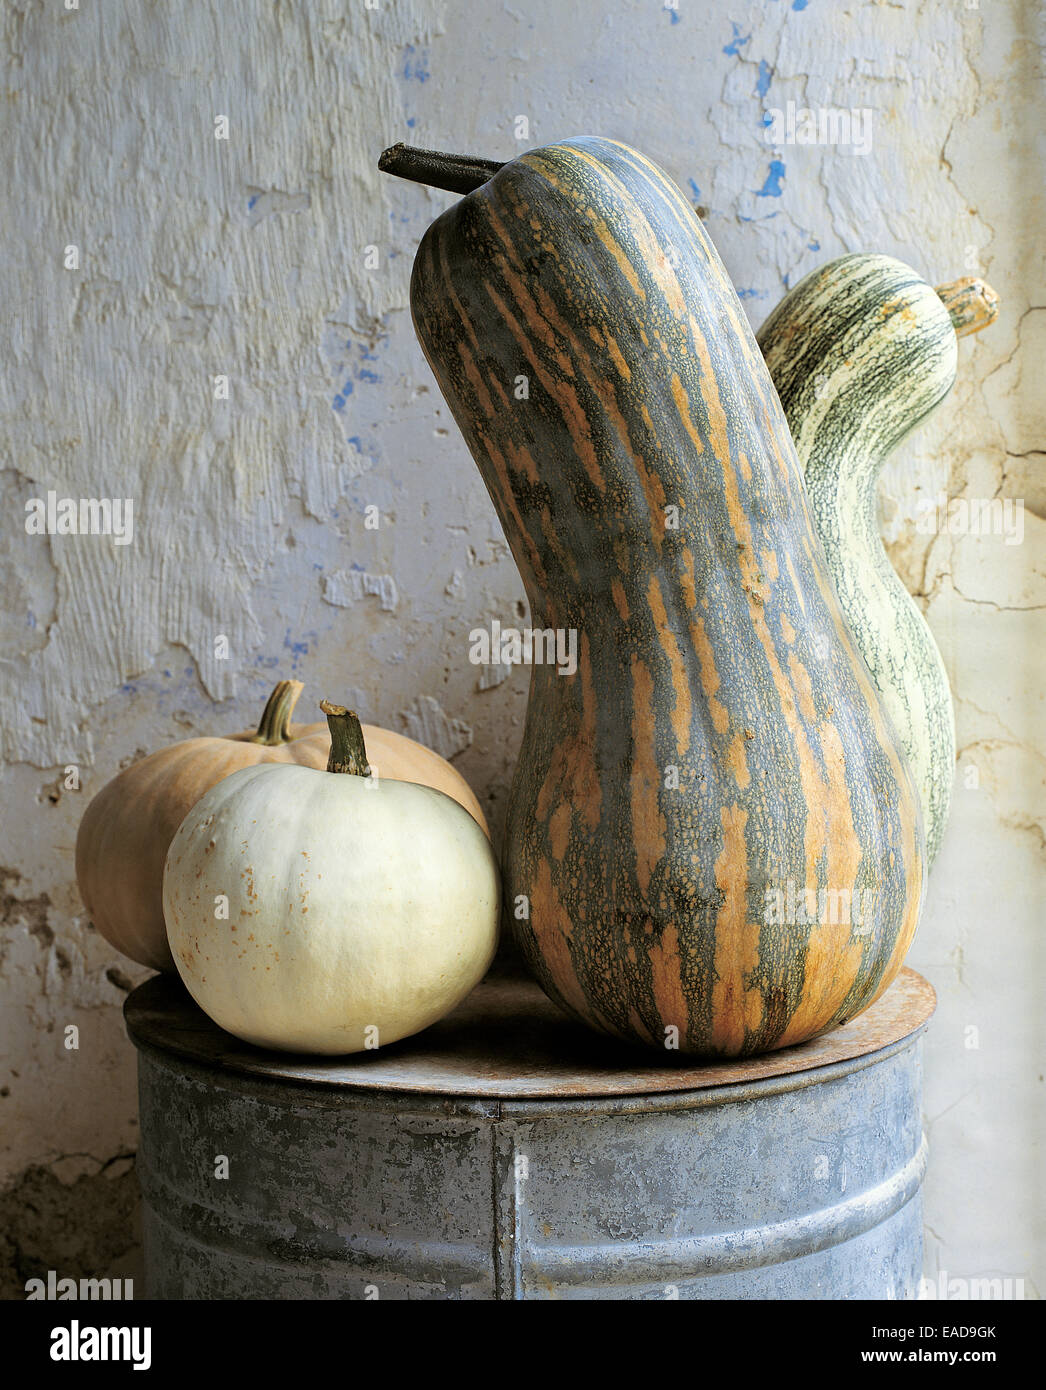 various squash and gourds at farm Stock Photo